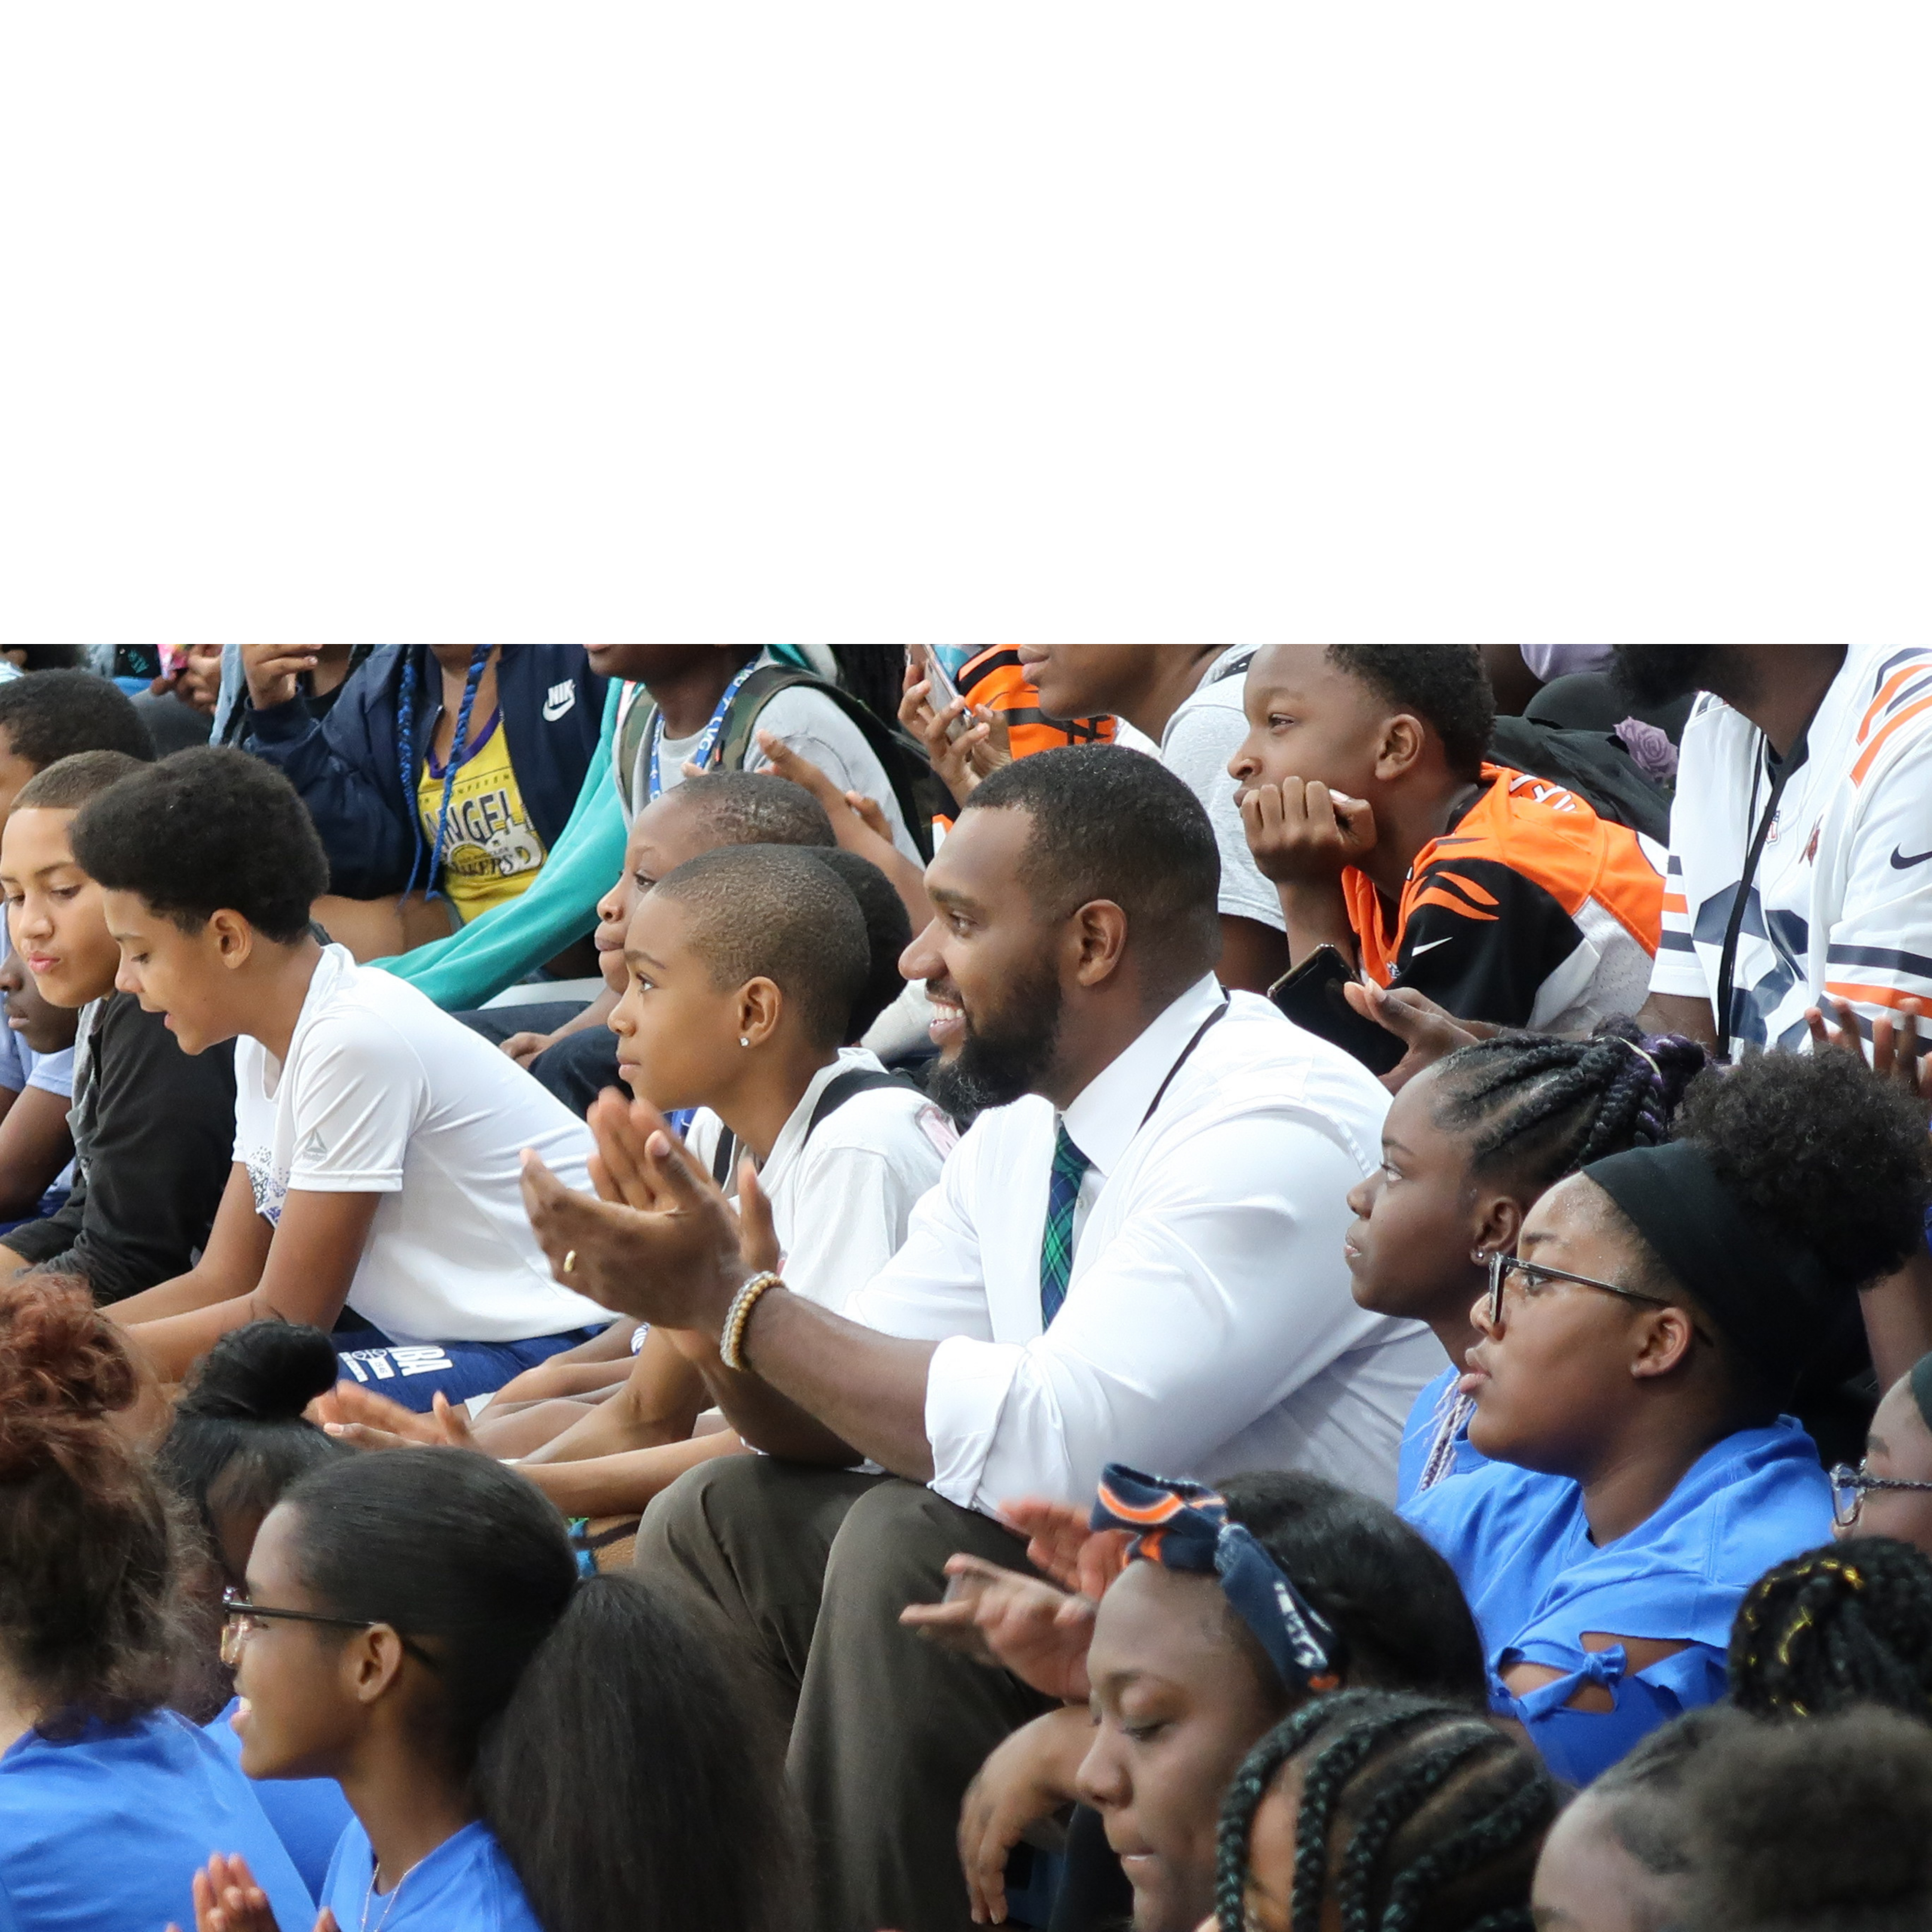 Principal Taylor Porter clapping and smiling surrounded by students sitting on bleachers around him.